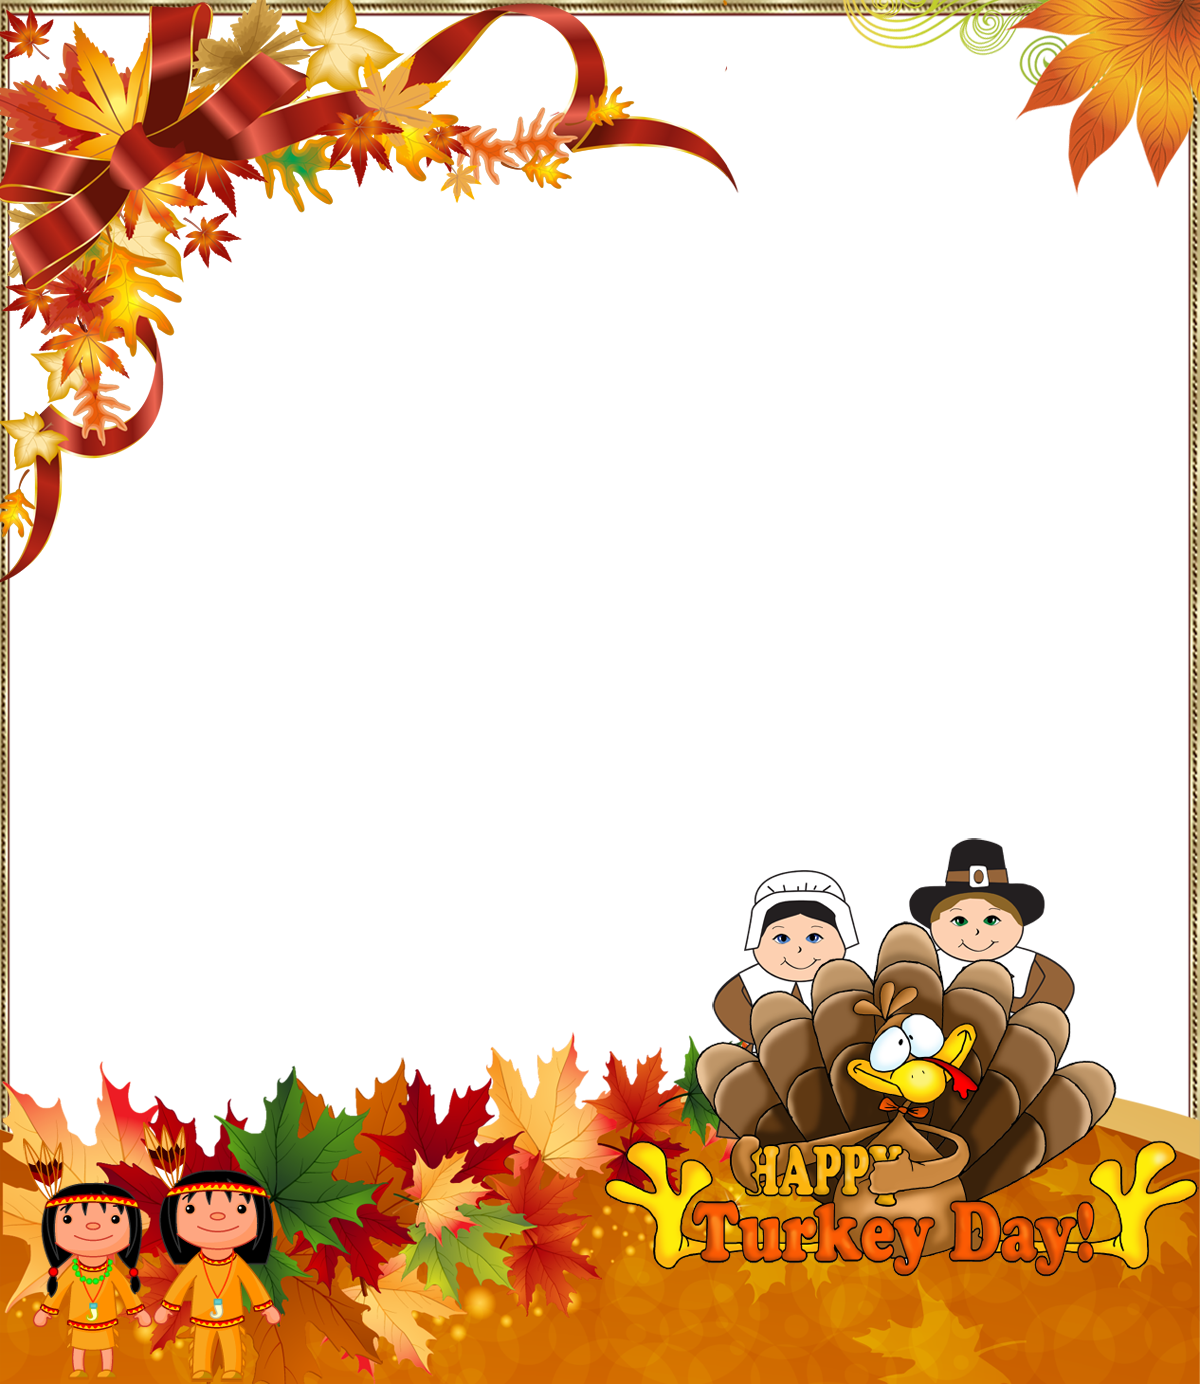 Thanksgiving Greeting Cardwith Cartoon Characters PNG